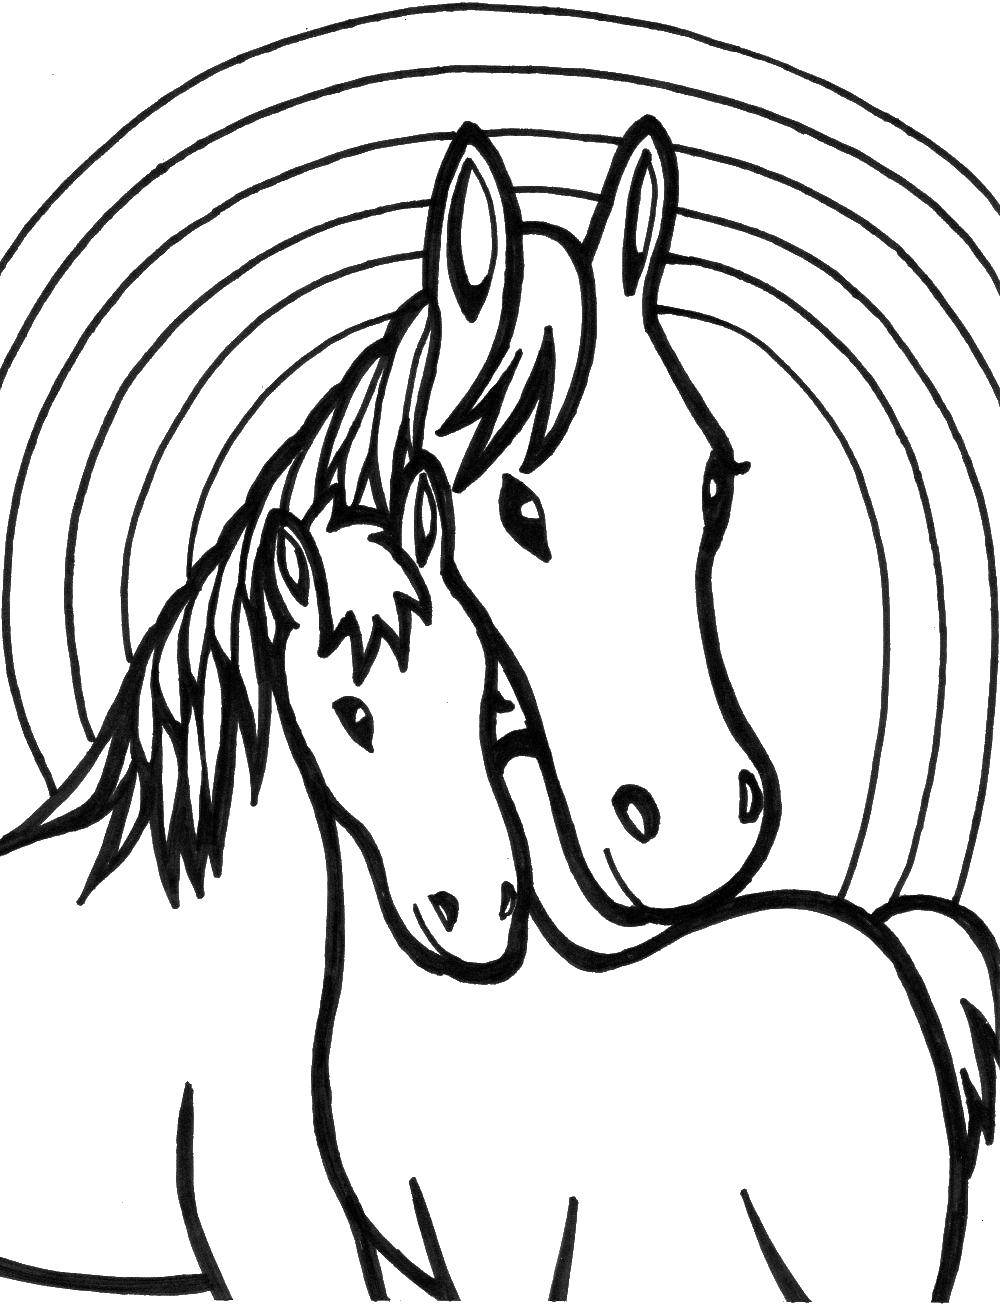 Coloring Horse. Category Animals. Tags:  animals, horse, horses.